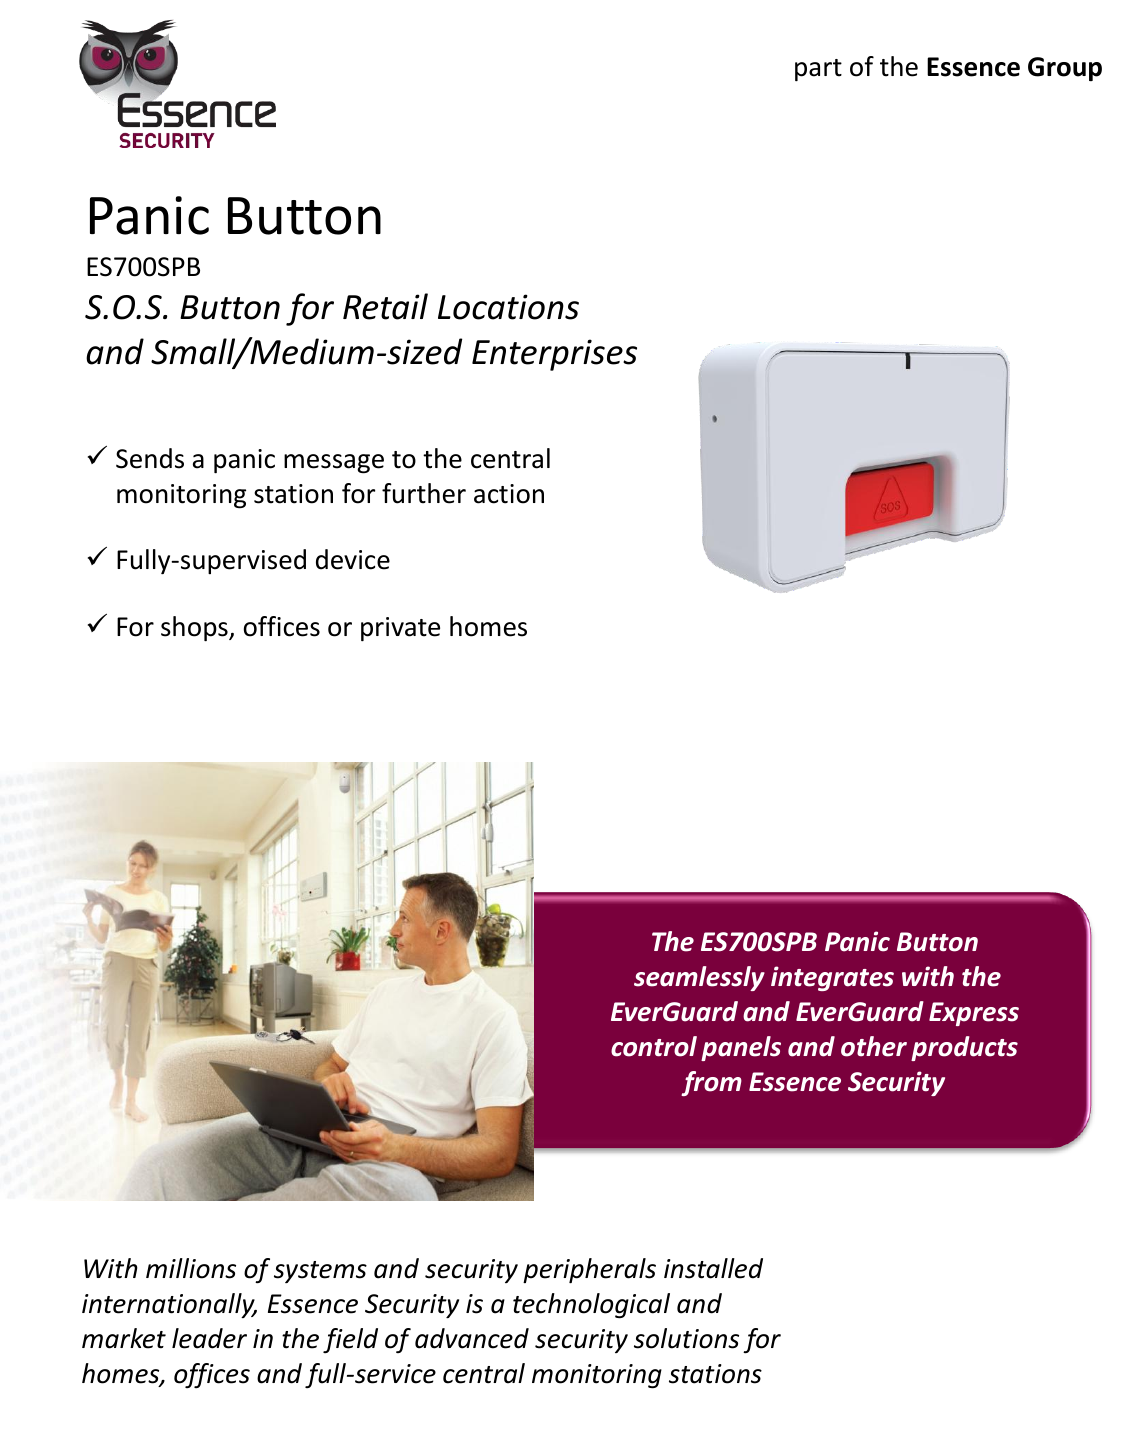 Panic Button ES700SPB S.O.S. Button for Retail Locations and Small/Medium-sized Enterprises Sends a panic message to the central monitoring station for further action Fully-supervised device For shops, offices or private homes    With millions of systems and security peripherals installed internationally, Essence Security is a technological and market leader in the field of advanced security solutions for homes, offices and full-service central monitoring stations The ES700SPB Panic Button  seamlessly integrates with the EverGuard and EverGuard Express control panels and other products from Essence Security part of the Essence Group 